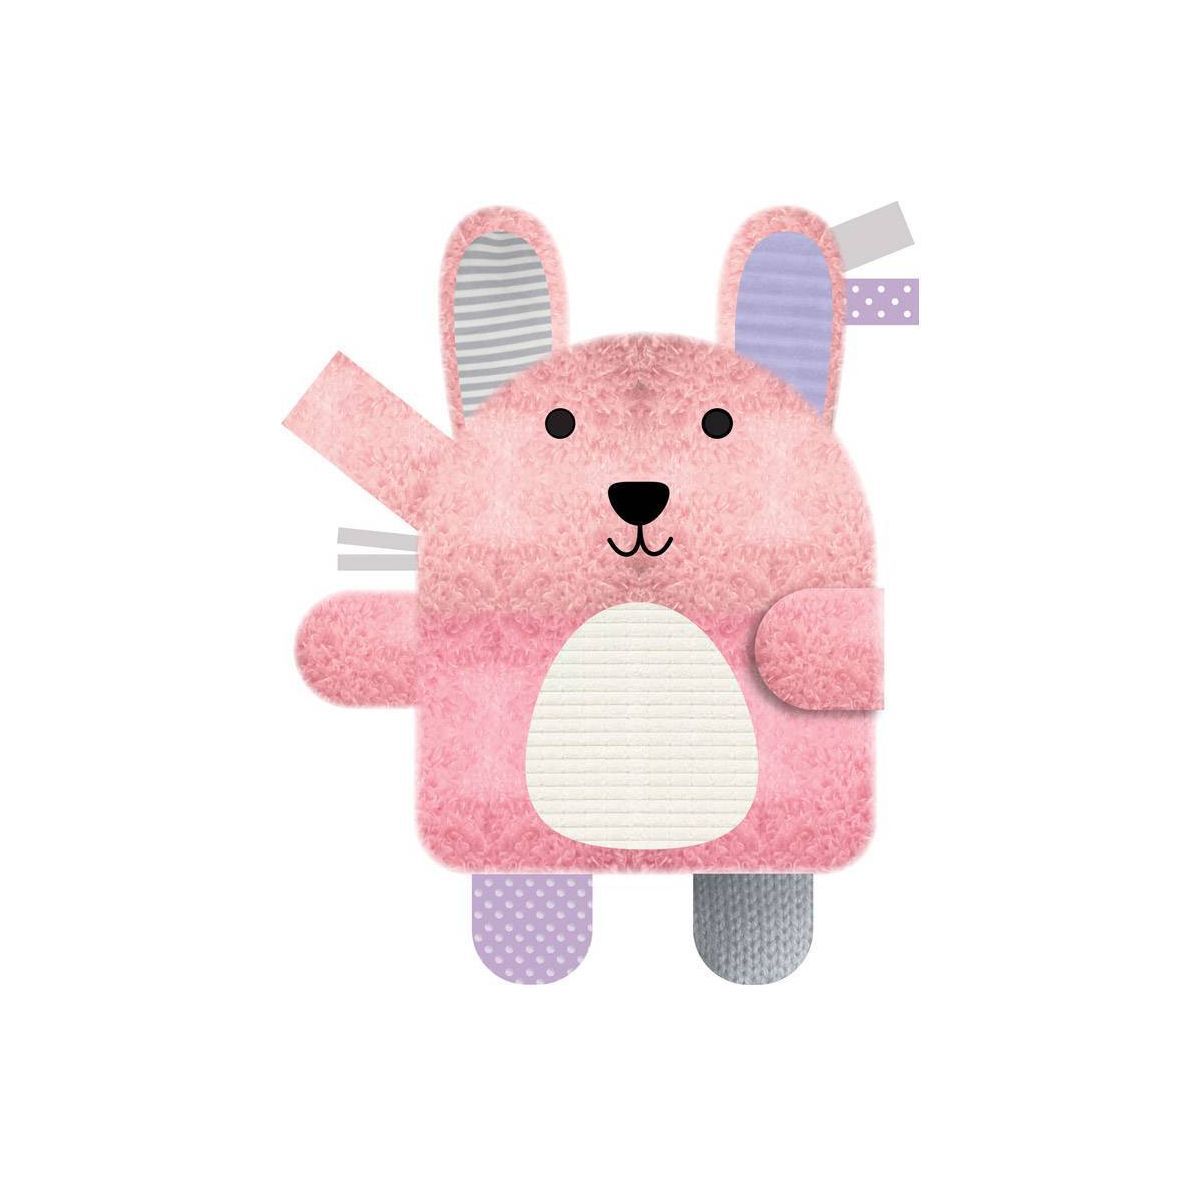 Make Believe Ideas New Baby Learning Toy - Bunny Book | Target